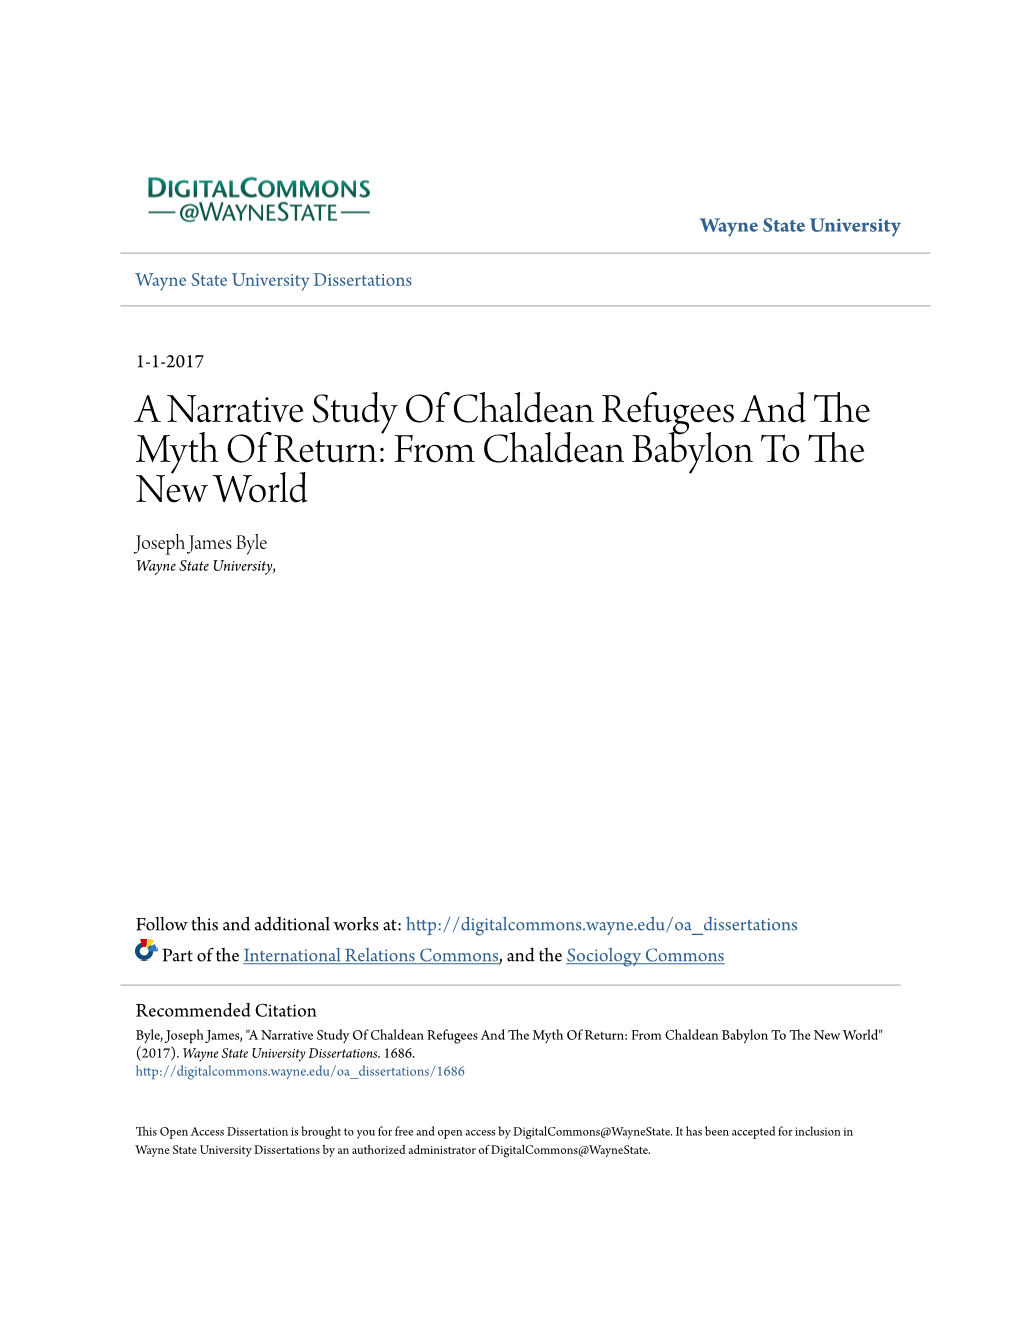 A Narrative Study of Chaldean Refugees and the Myth of Return: from Chaldean Babylon to the New World Joseph James Byle Wayne State University